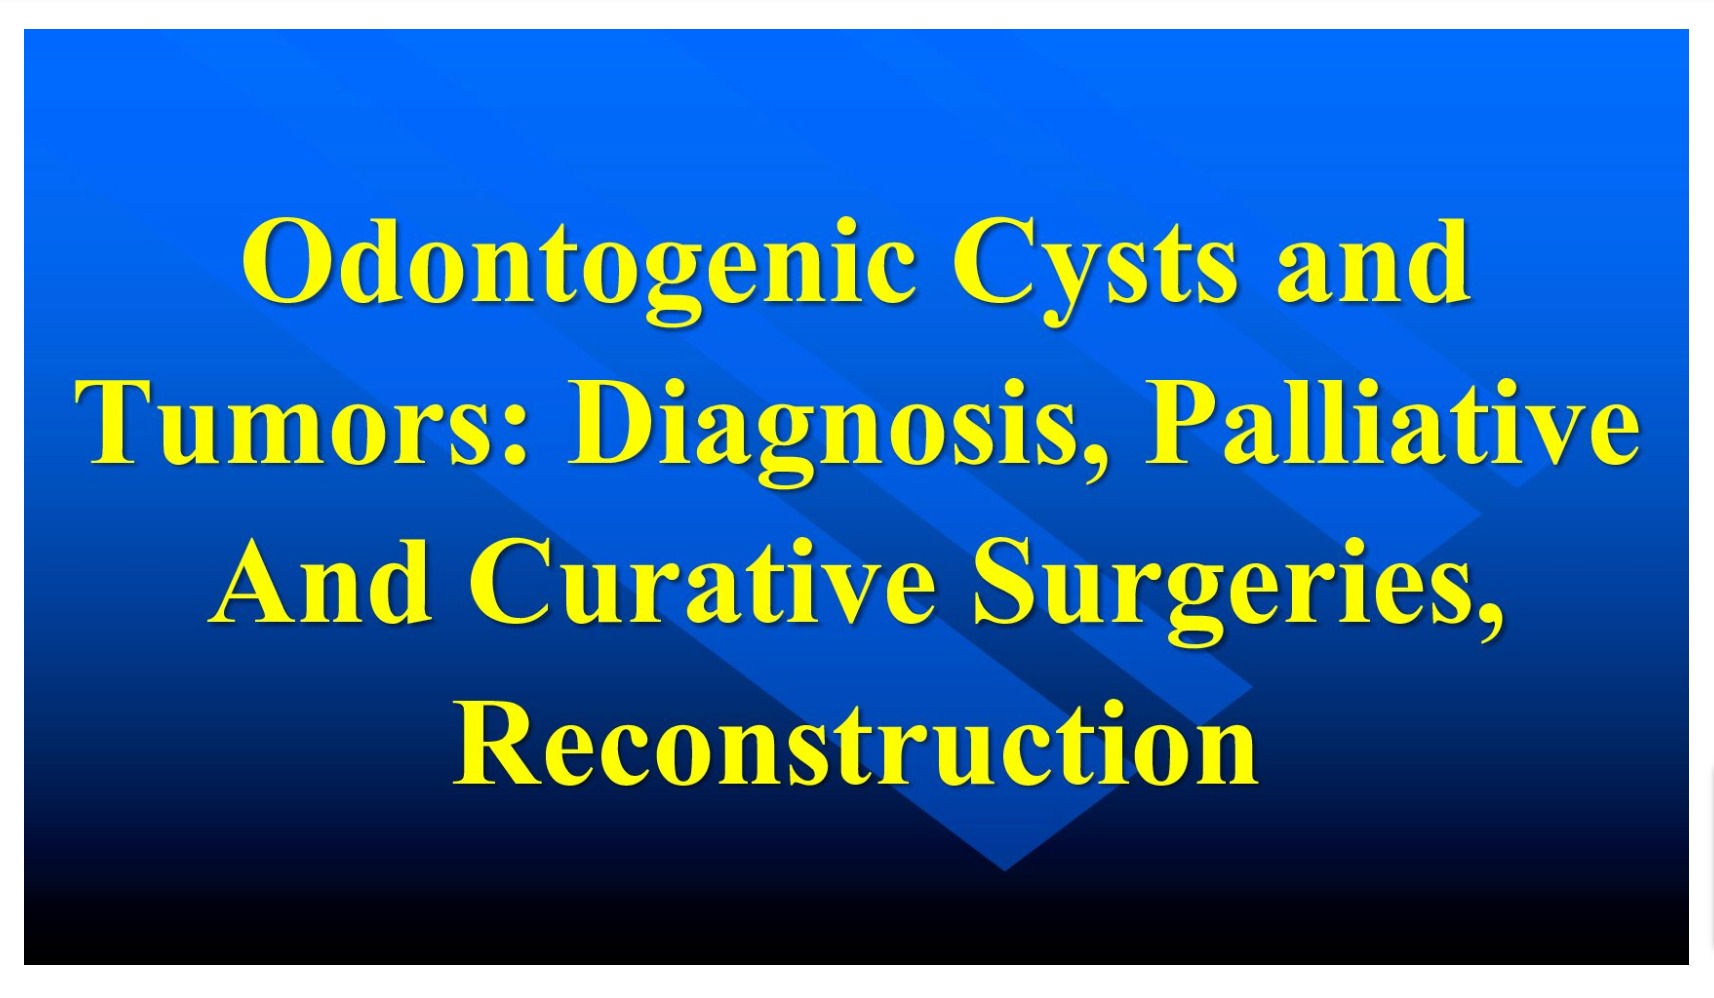 Odontogenic Cysts and Tumors- Diagnosis, Palliative and Curative Surgeries, Reconstruction